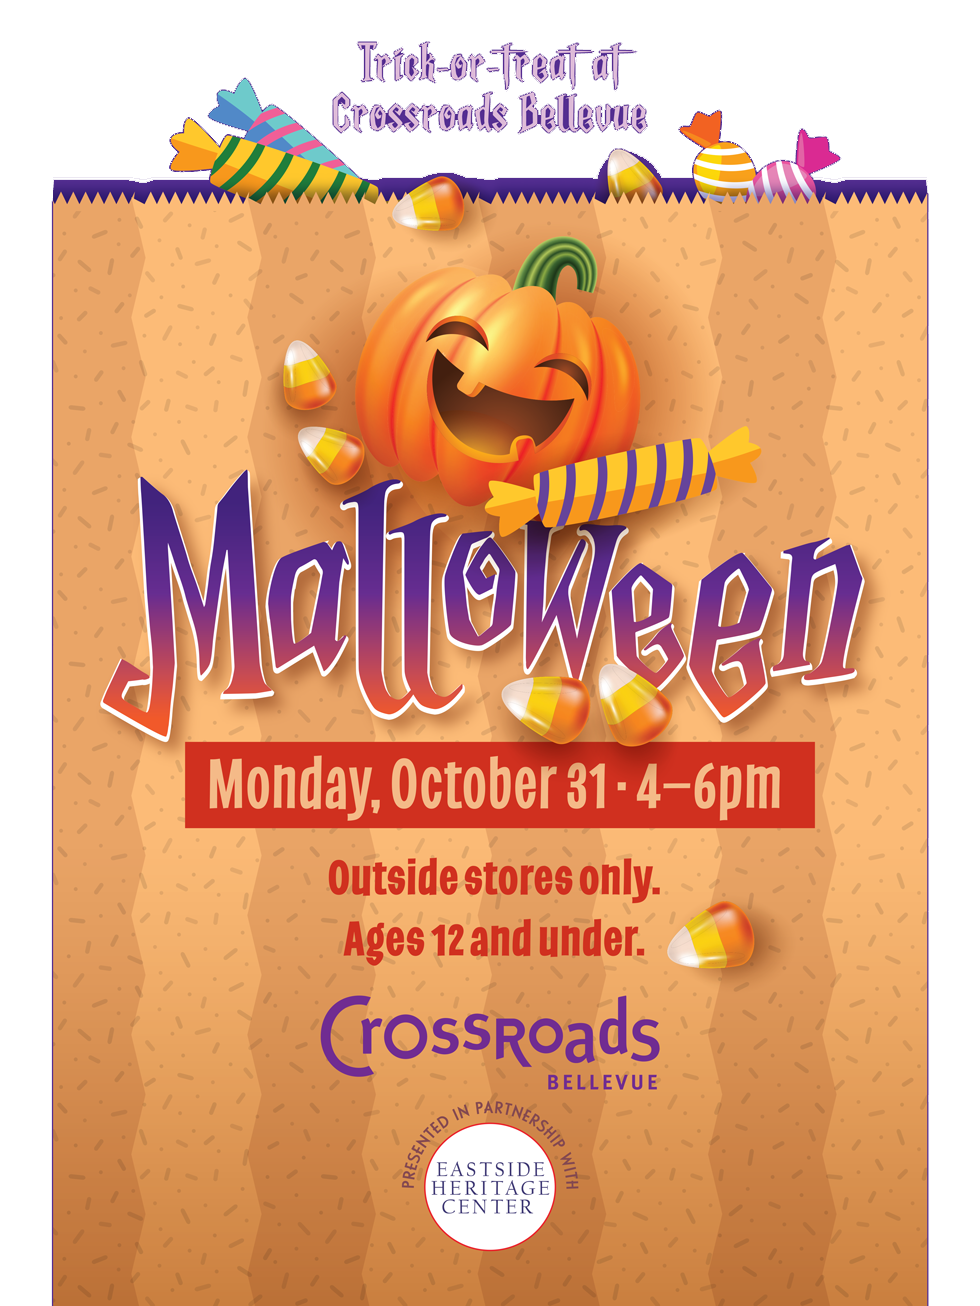 Malloween-980px-for-website.png (1)